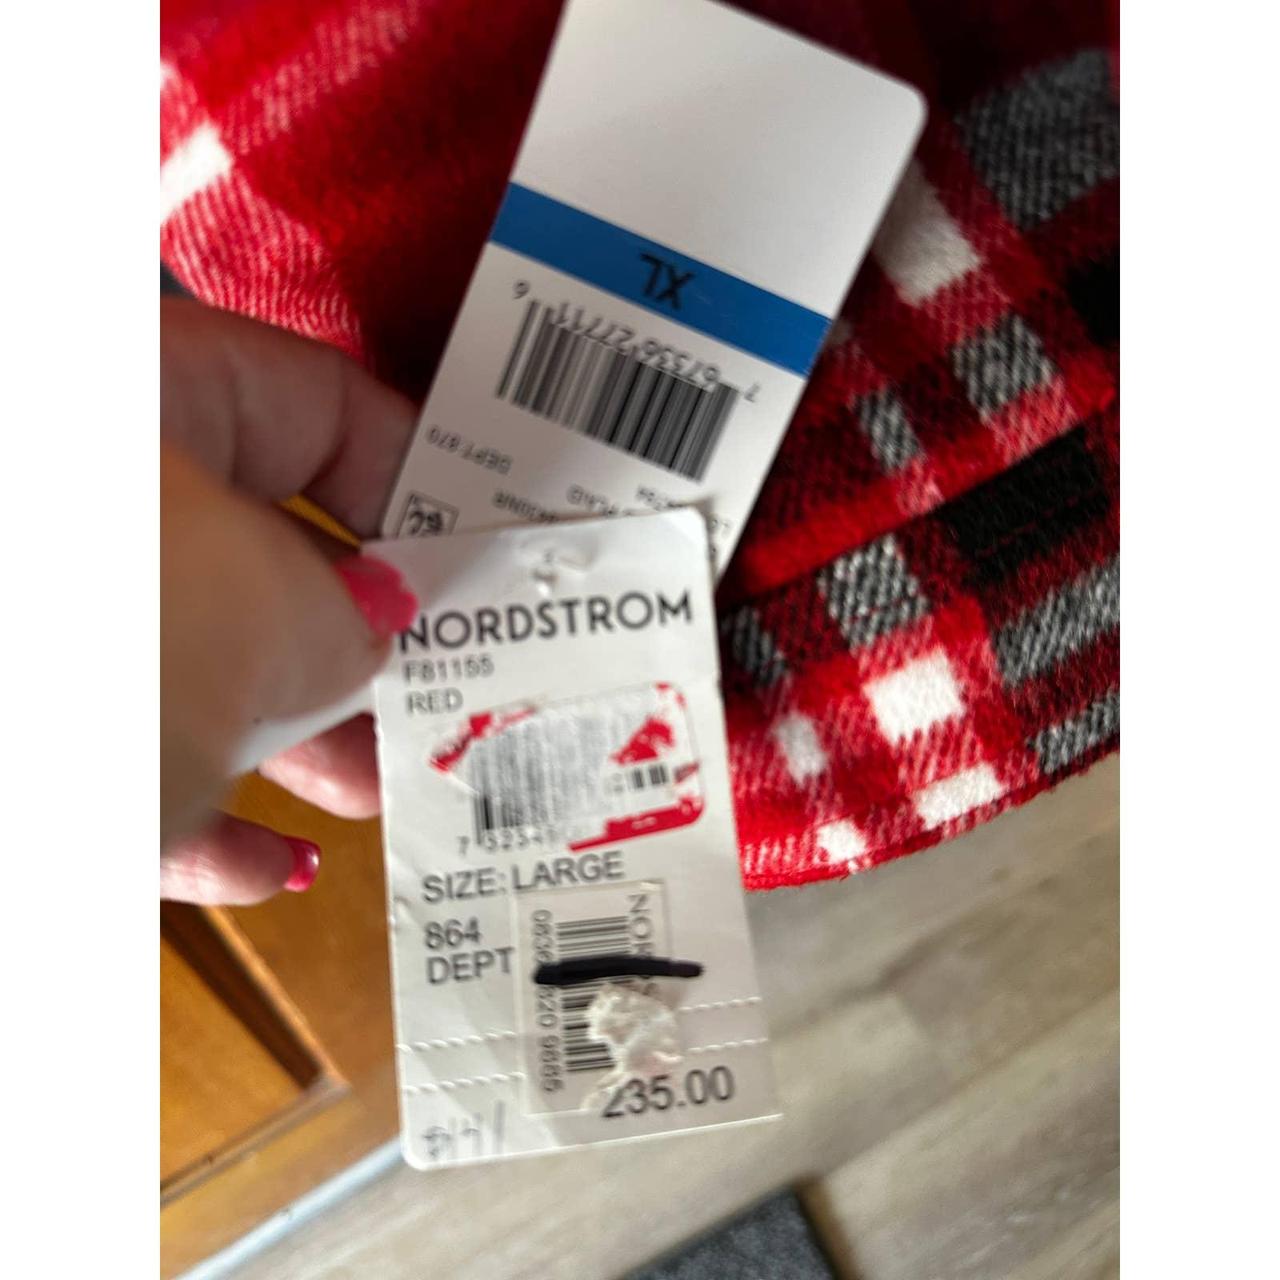 NWT Lucky Brand Red Plaid Flannel Jacket/Shacket - Depop